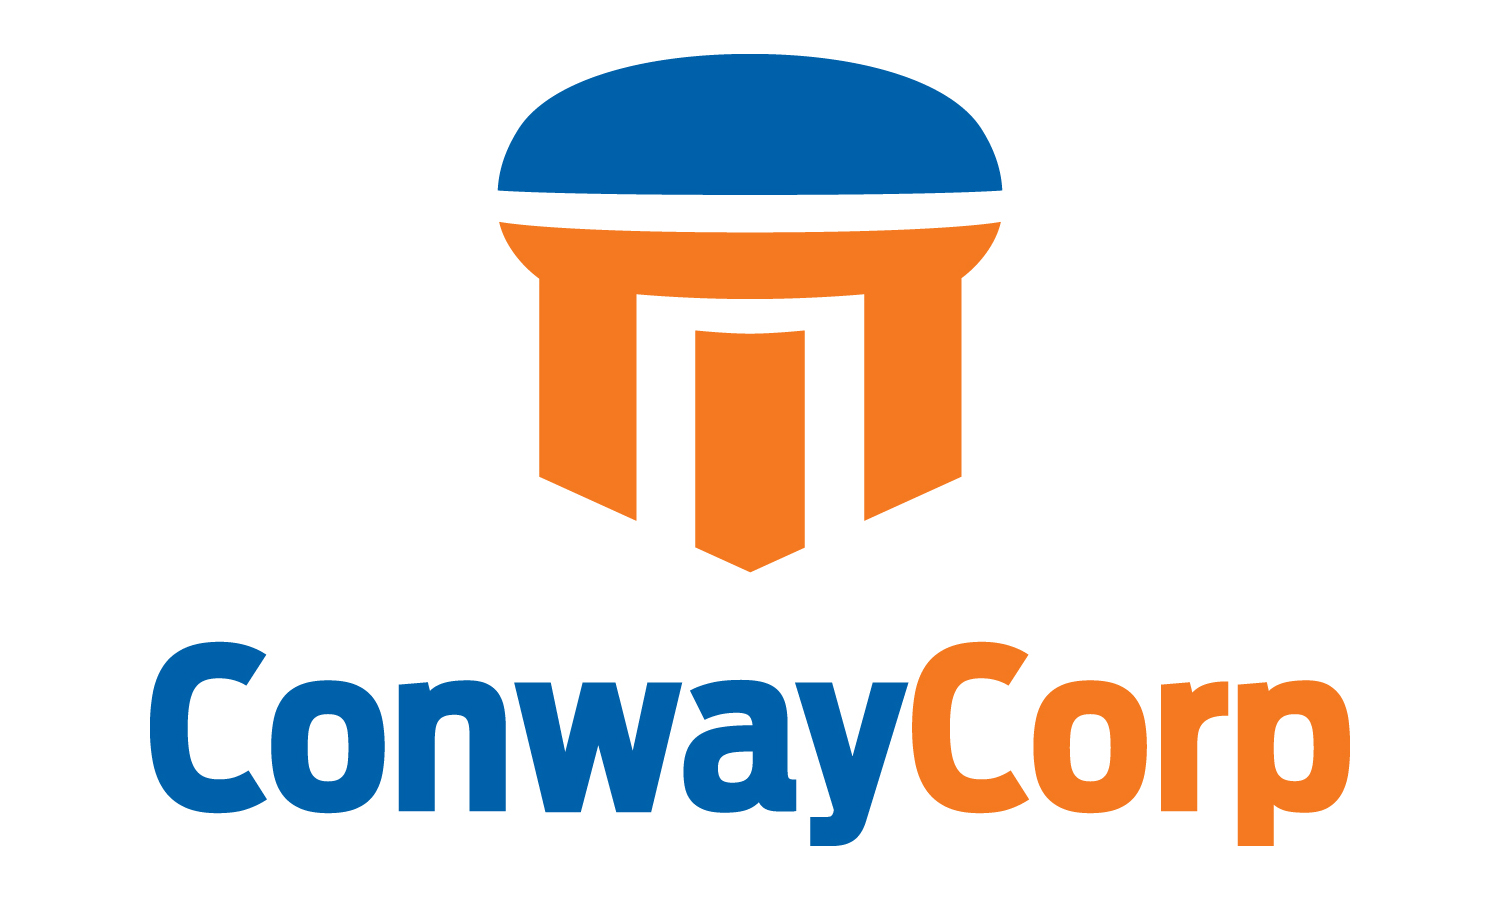 Conway Corp